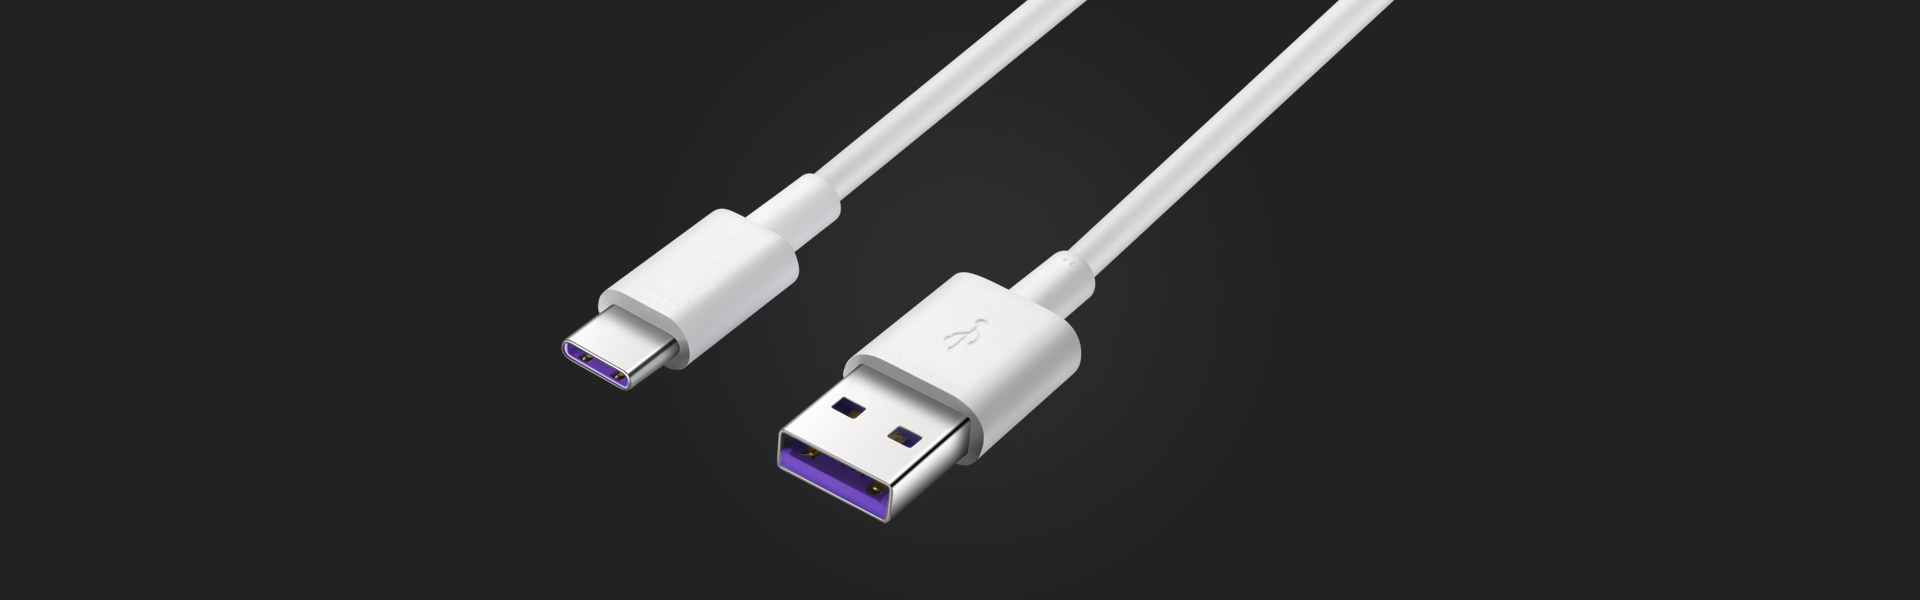 5 A USB-C Cable Included